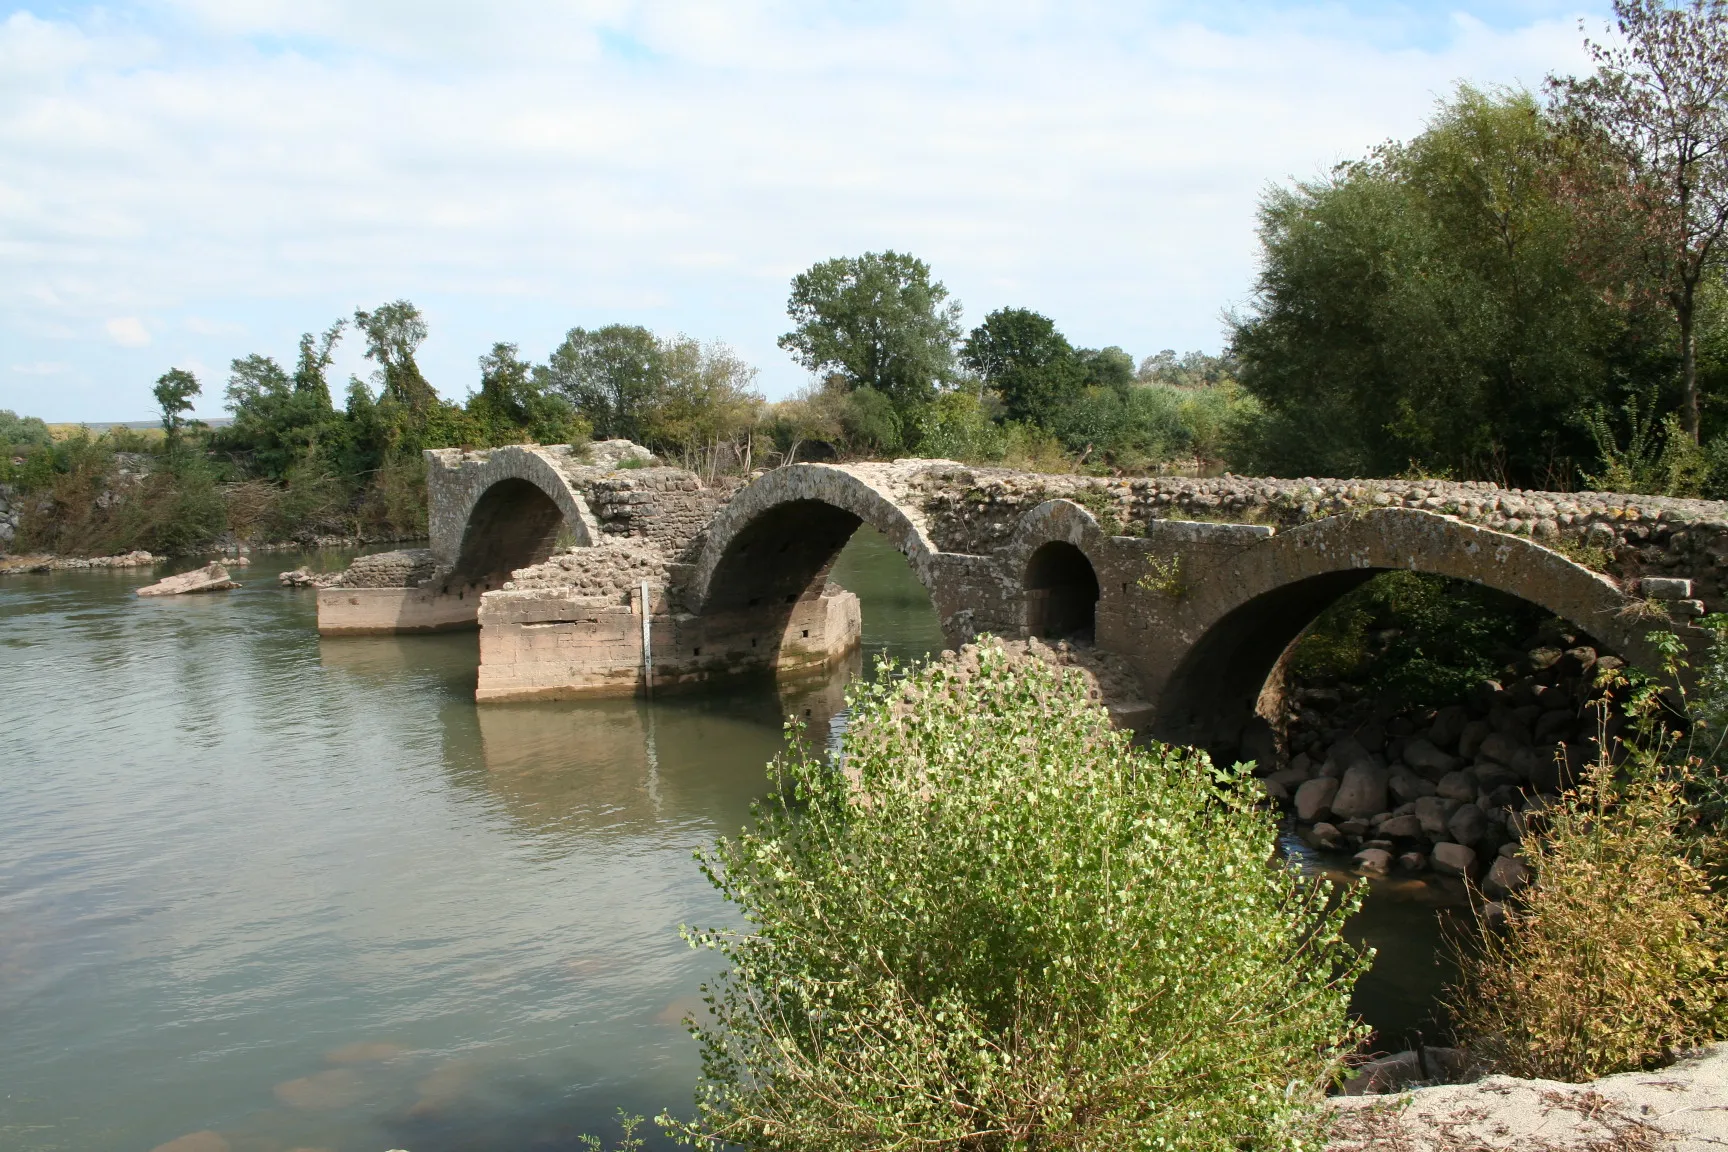 Photo showing: The remains of the Roman bridge of Saint-Thibéry across the river Hérault in Southern France. The bridge was part of the Via Domitia.